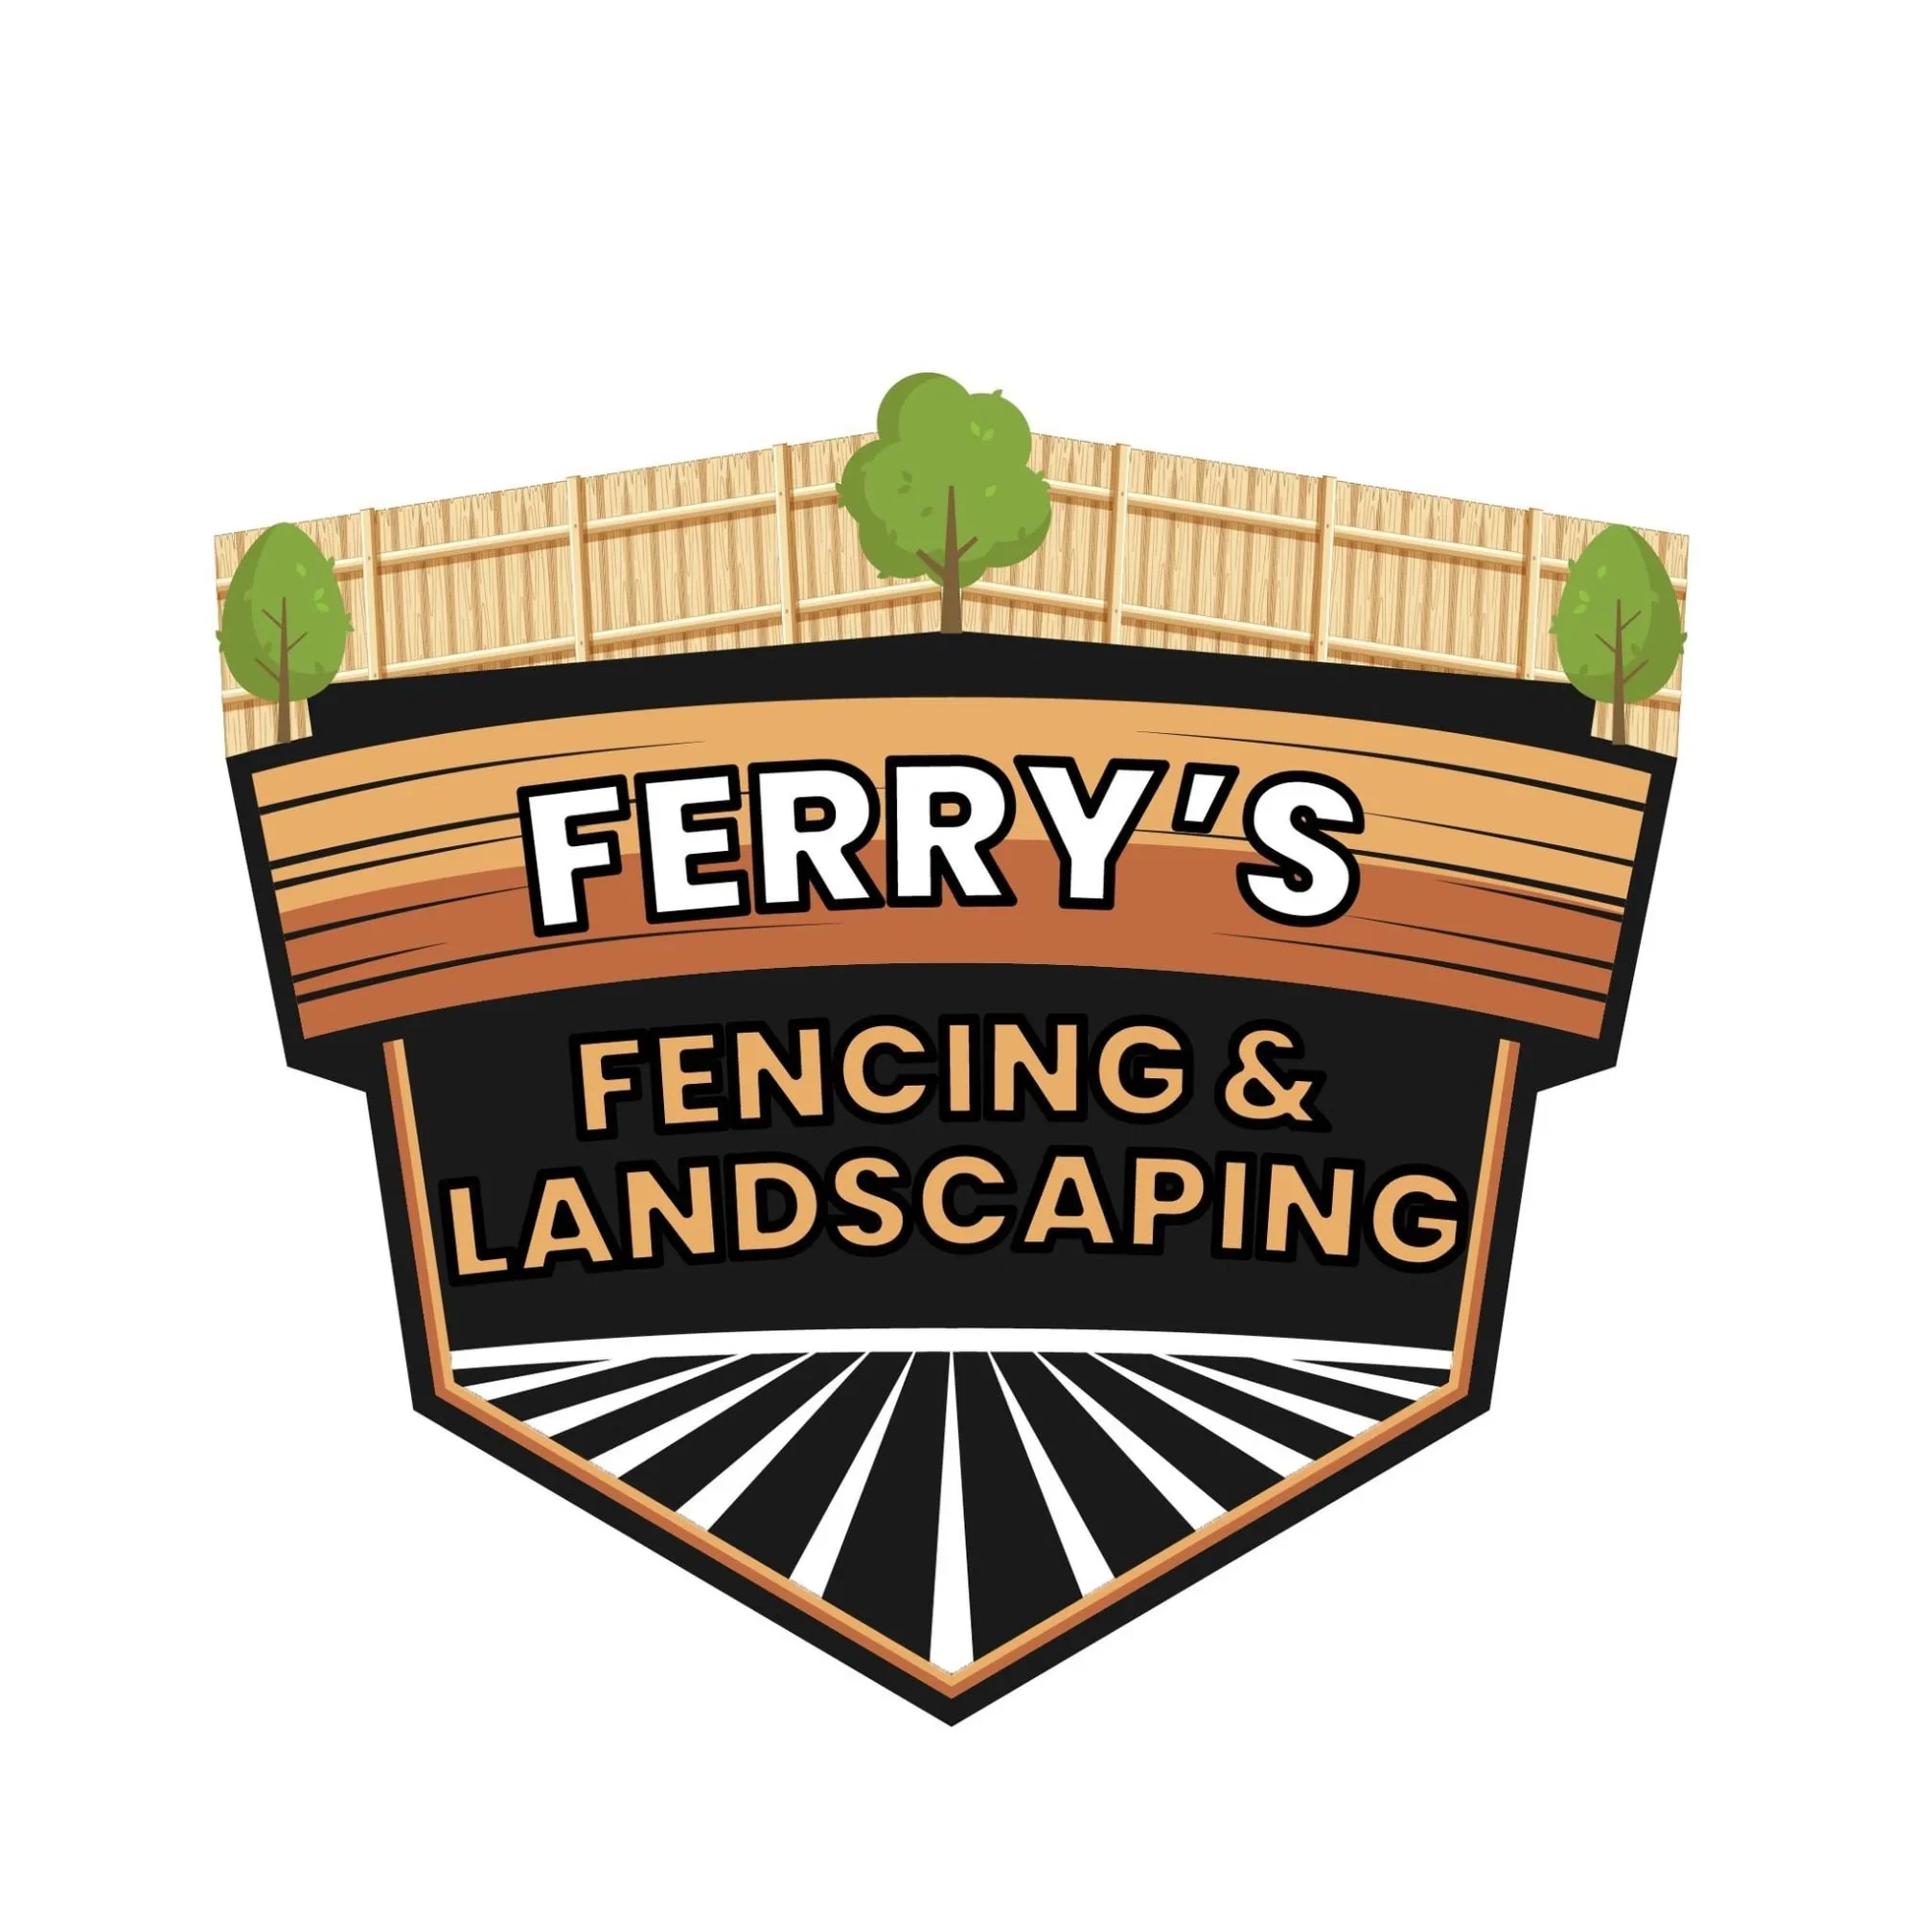 Ferry's Fencing and Landscaping - Houghton Le Spring, Tyne and Wear DH5 8JB - 07828 751125 | ShowMeLocal.com